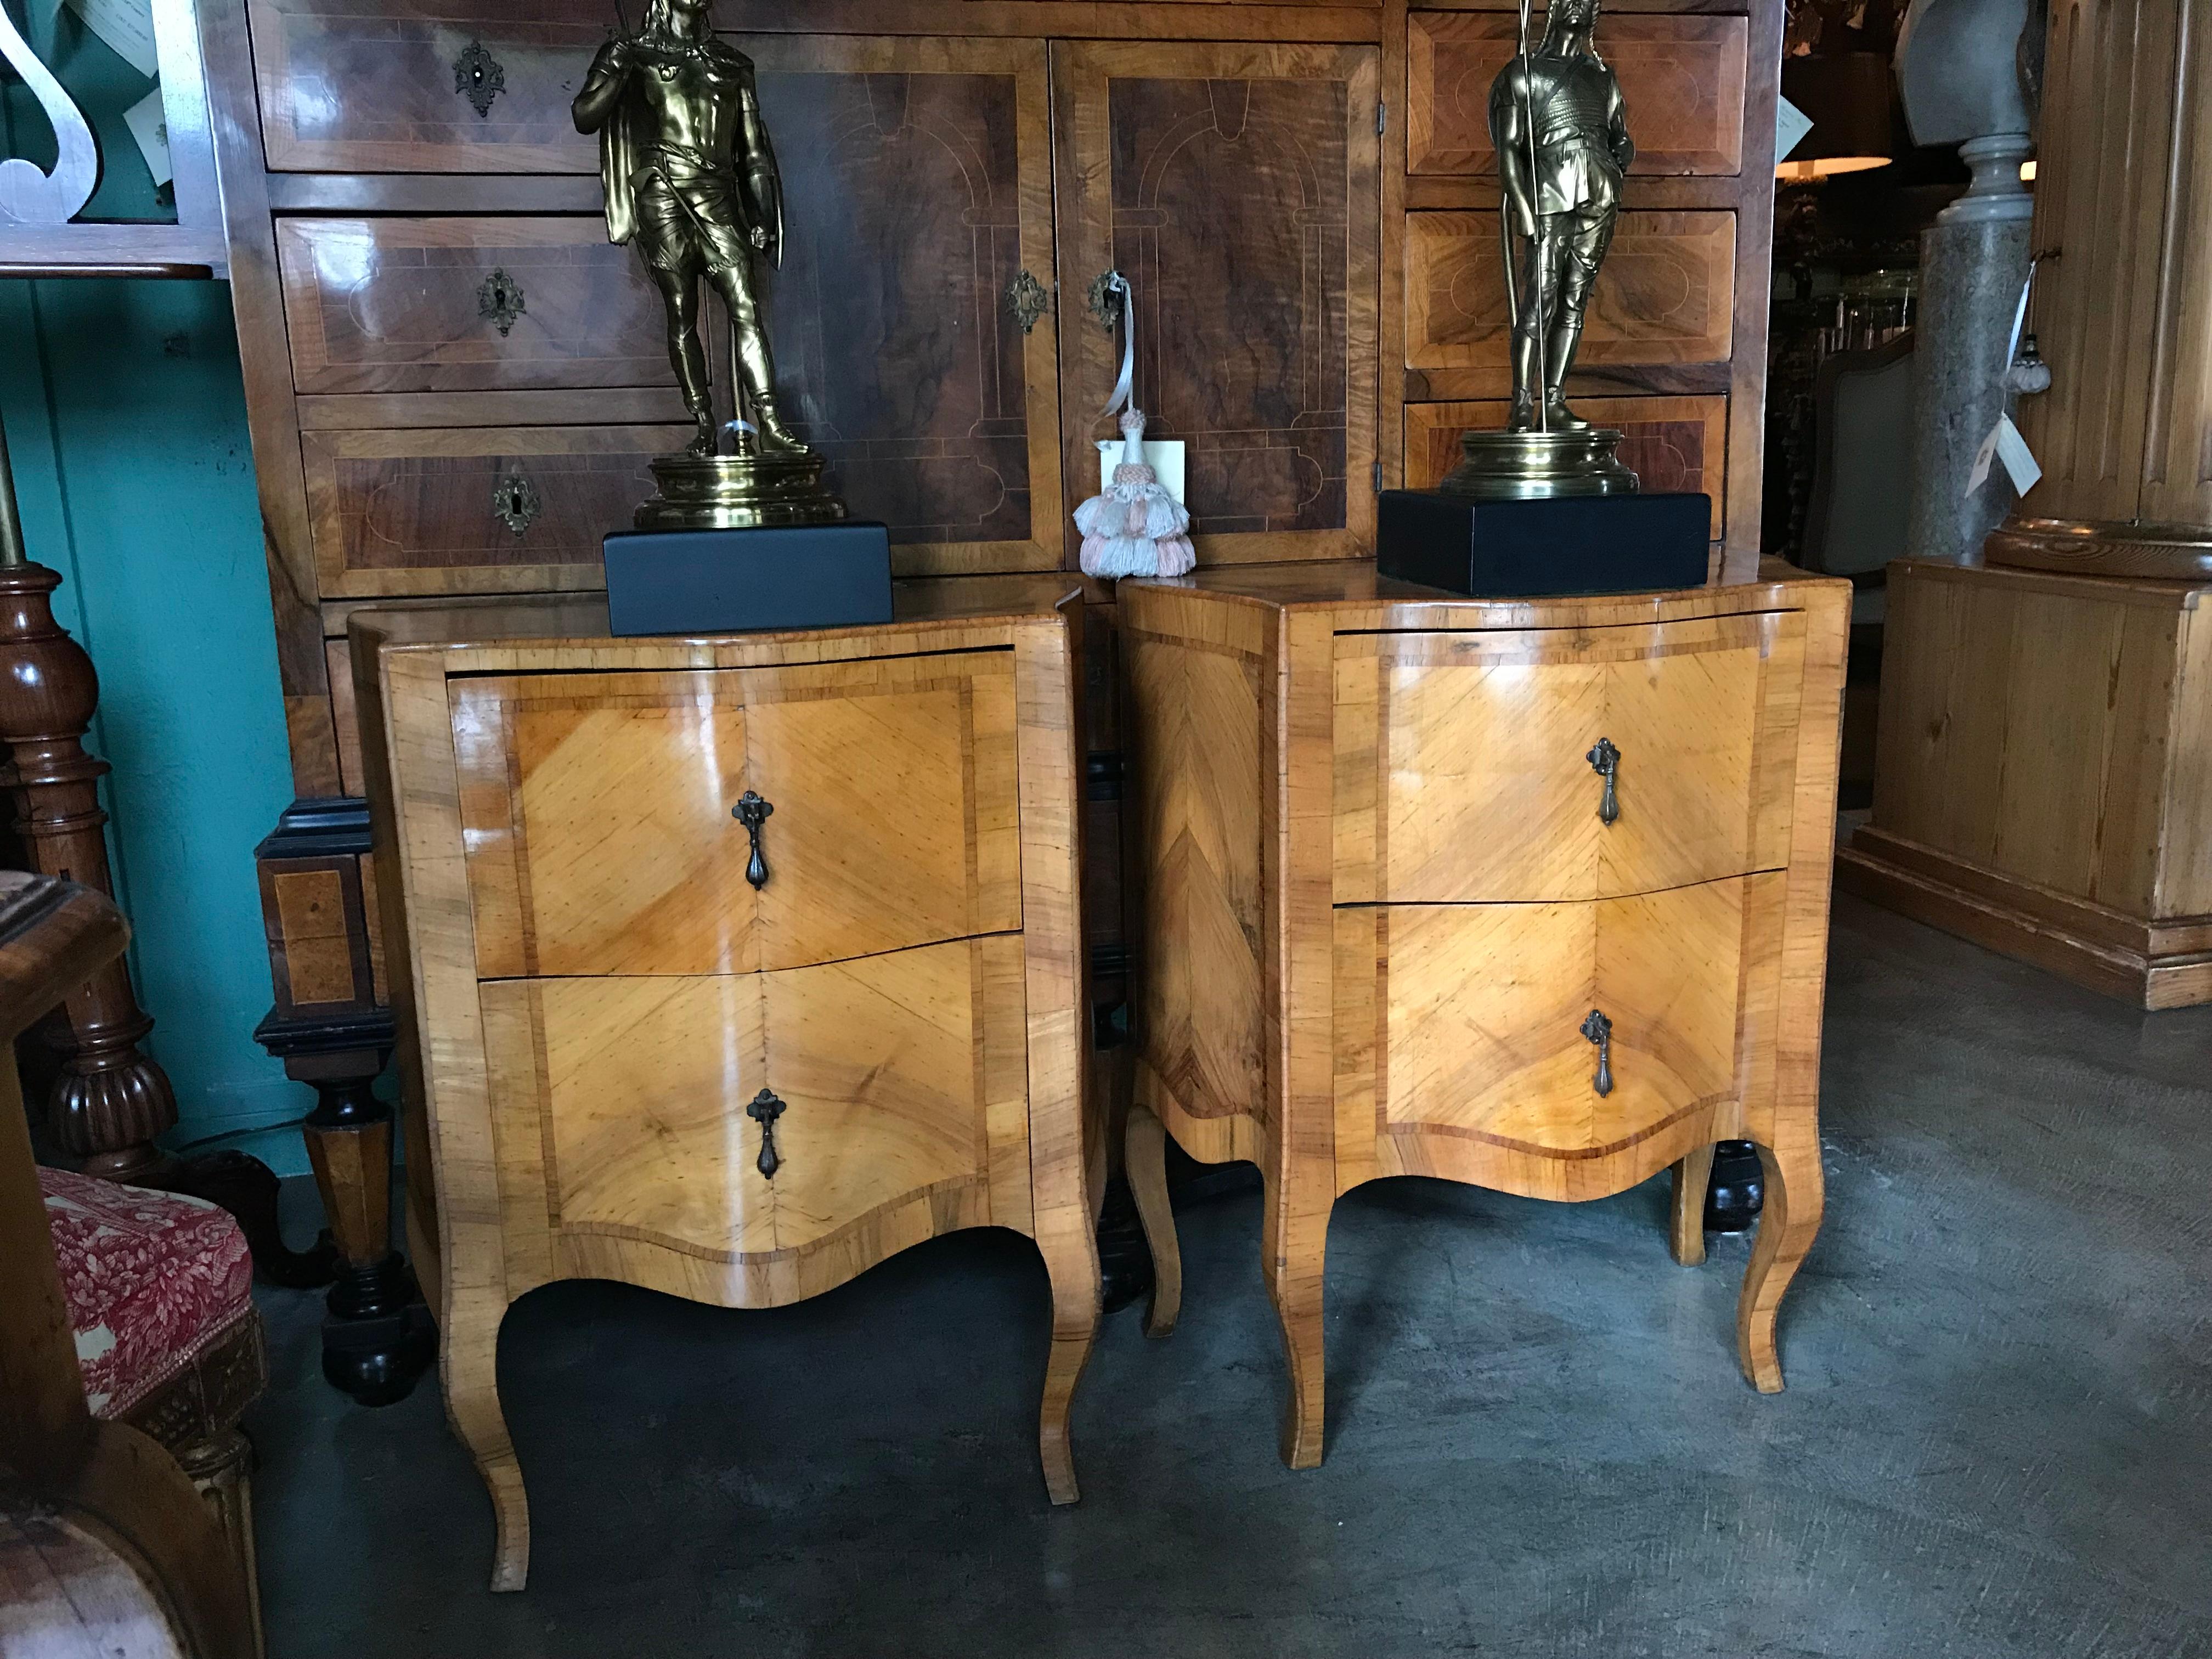 Pair of late 18th century Italian inlaid bedside fruit wood 
Comodini commodes bedside chest of drawers side tables. Very elegant work. 
They would serve as night tables on each side of the bed. It's a set of 2 pieces ( sold as a pair for a list of